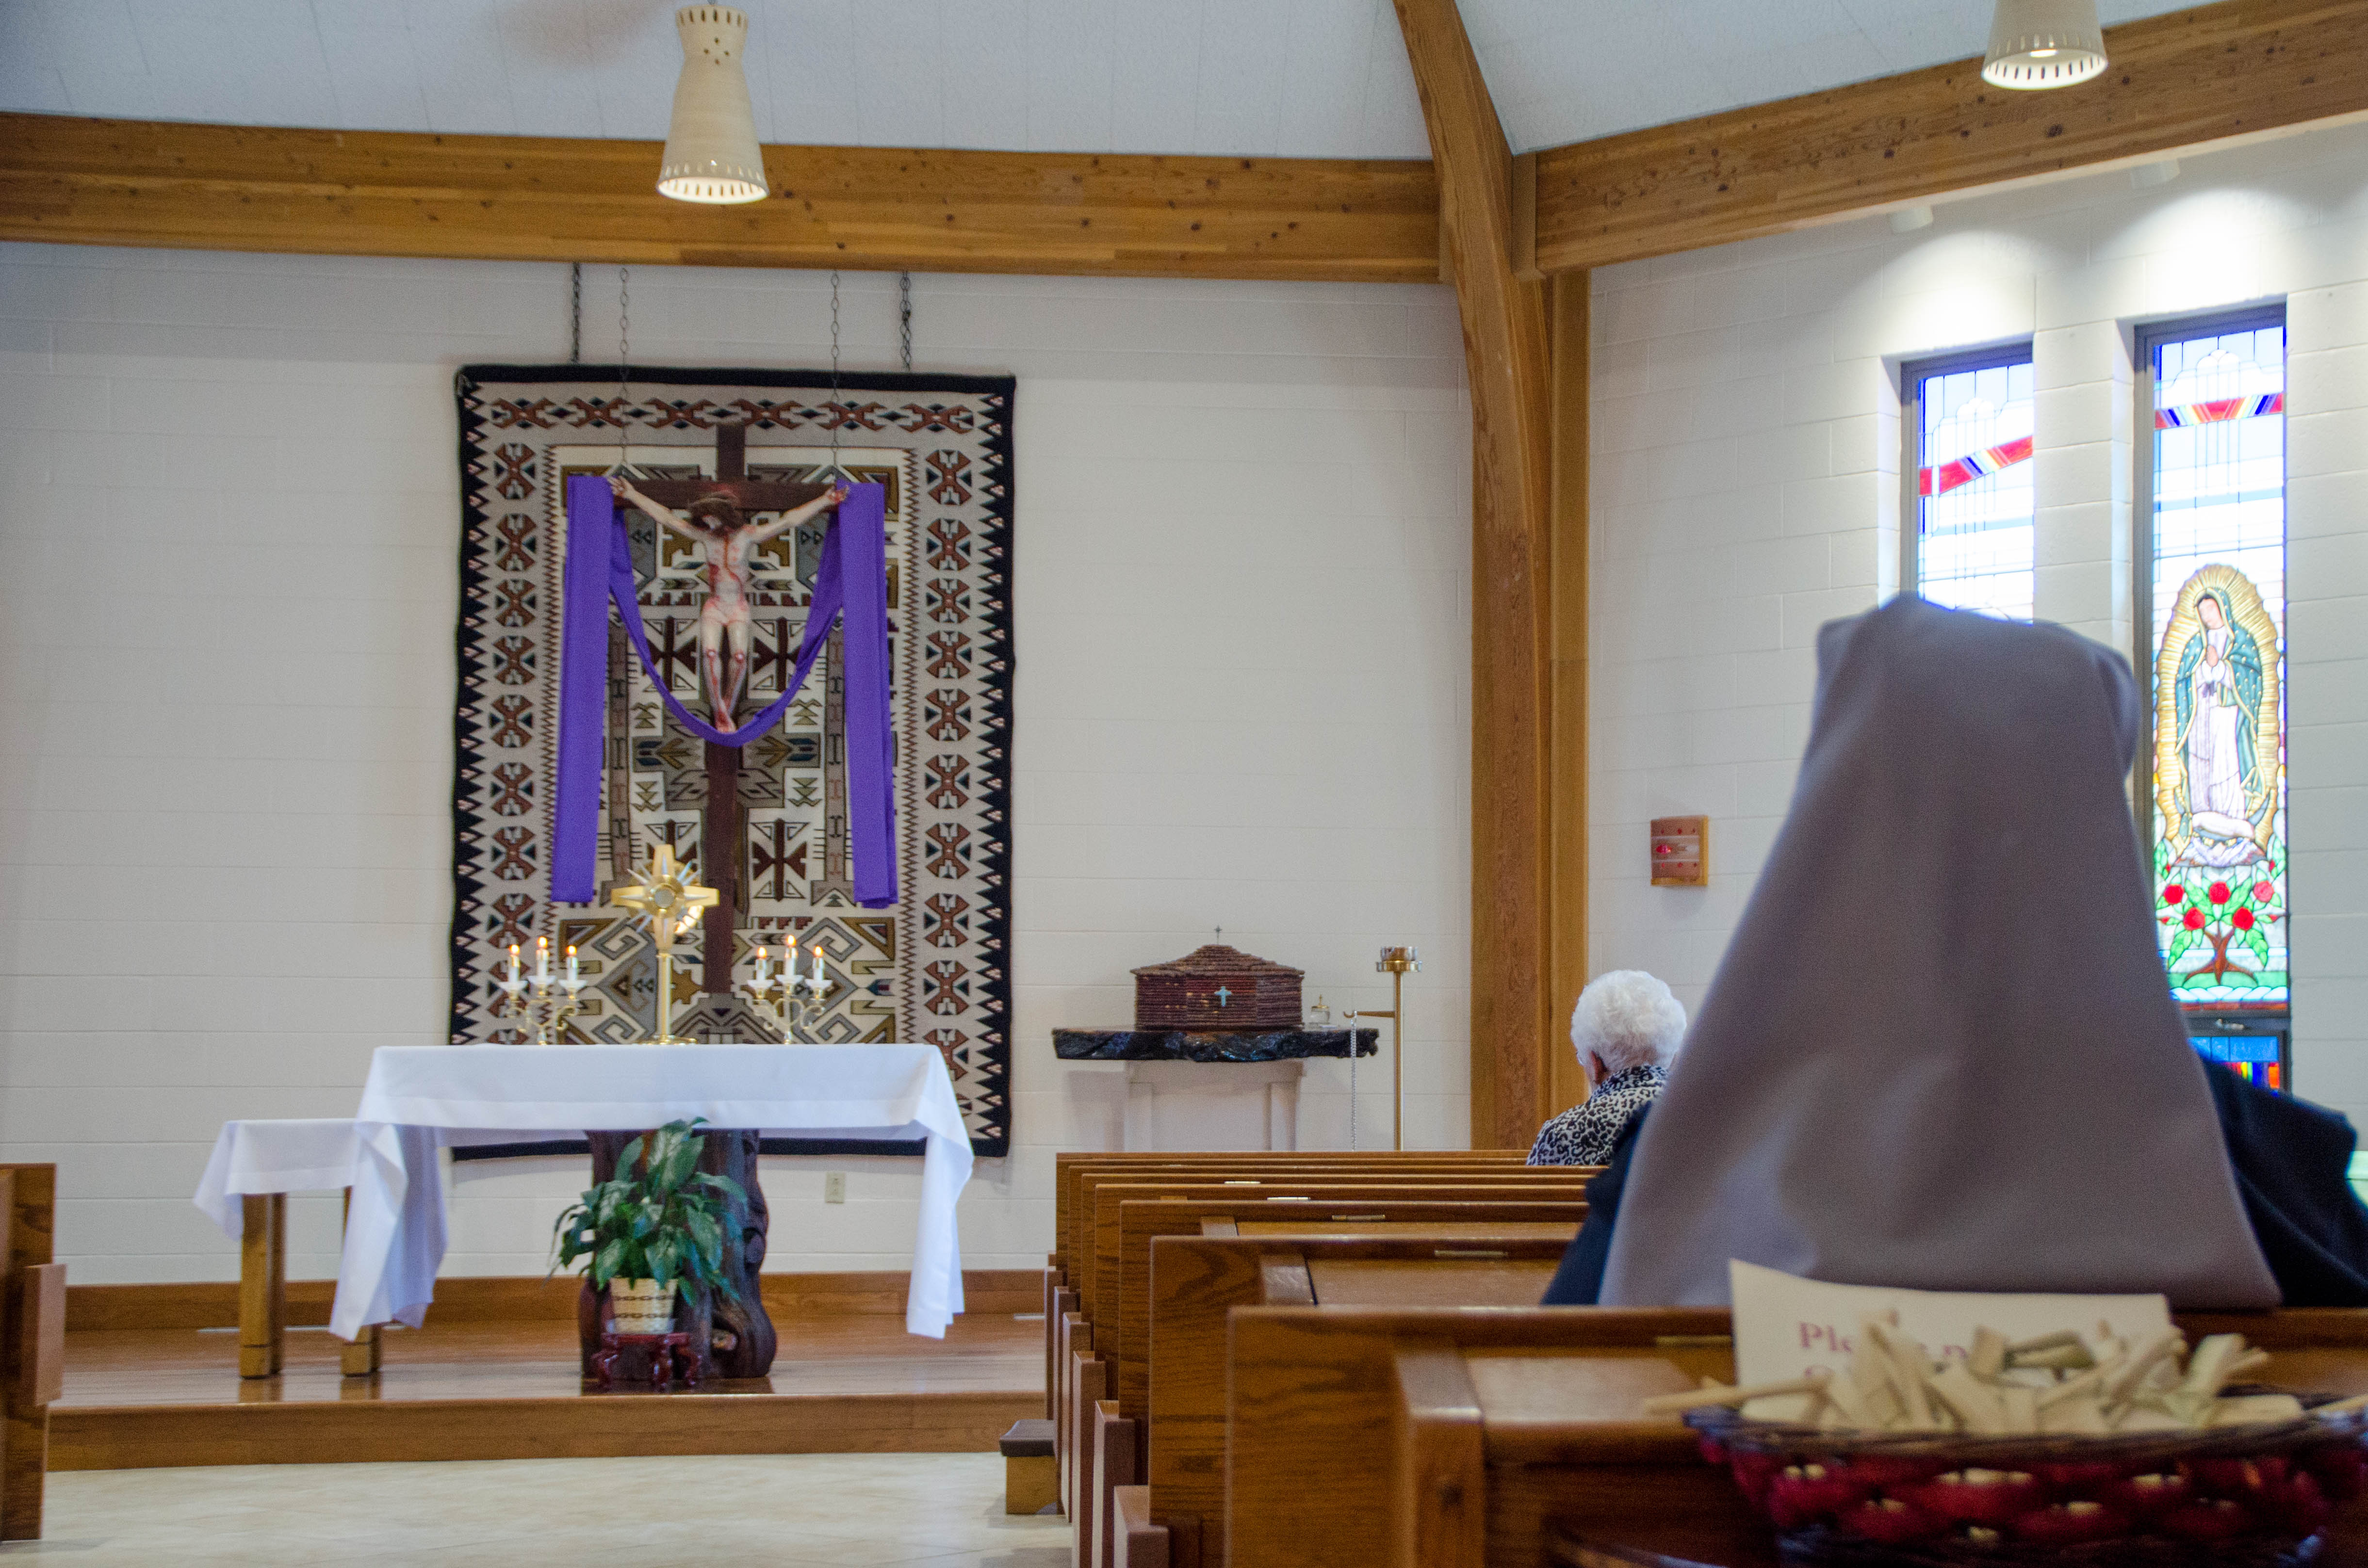 Sisters and residents of the home in Gallup held a day of Adoration and prayer for their upcoming Supreme Court case.